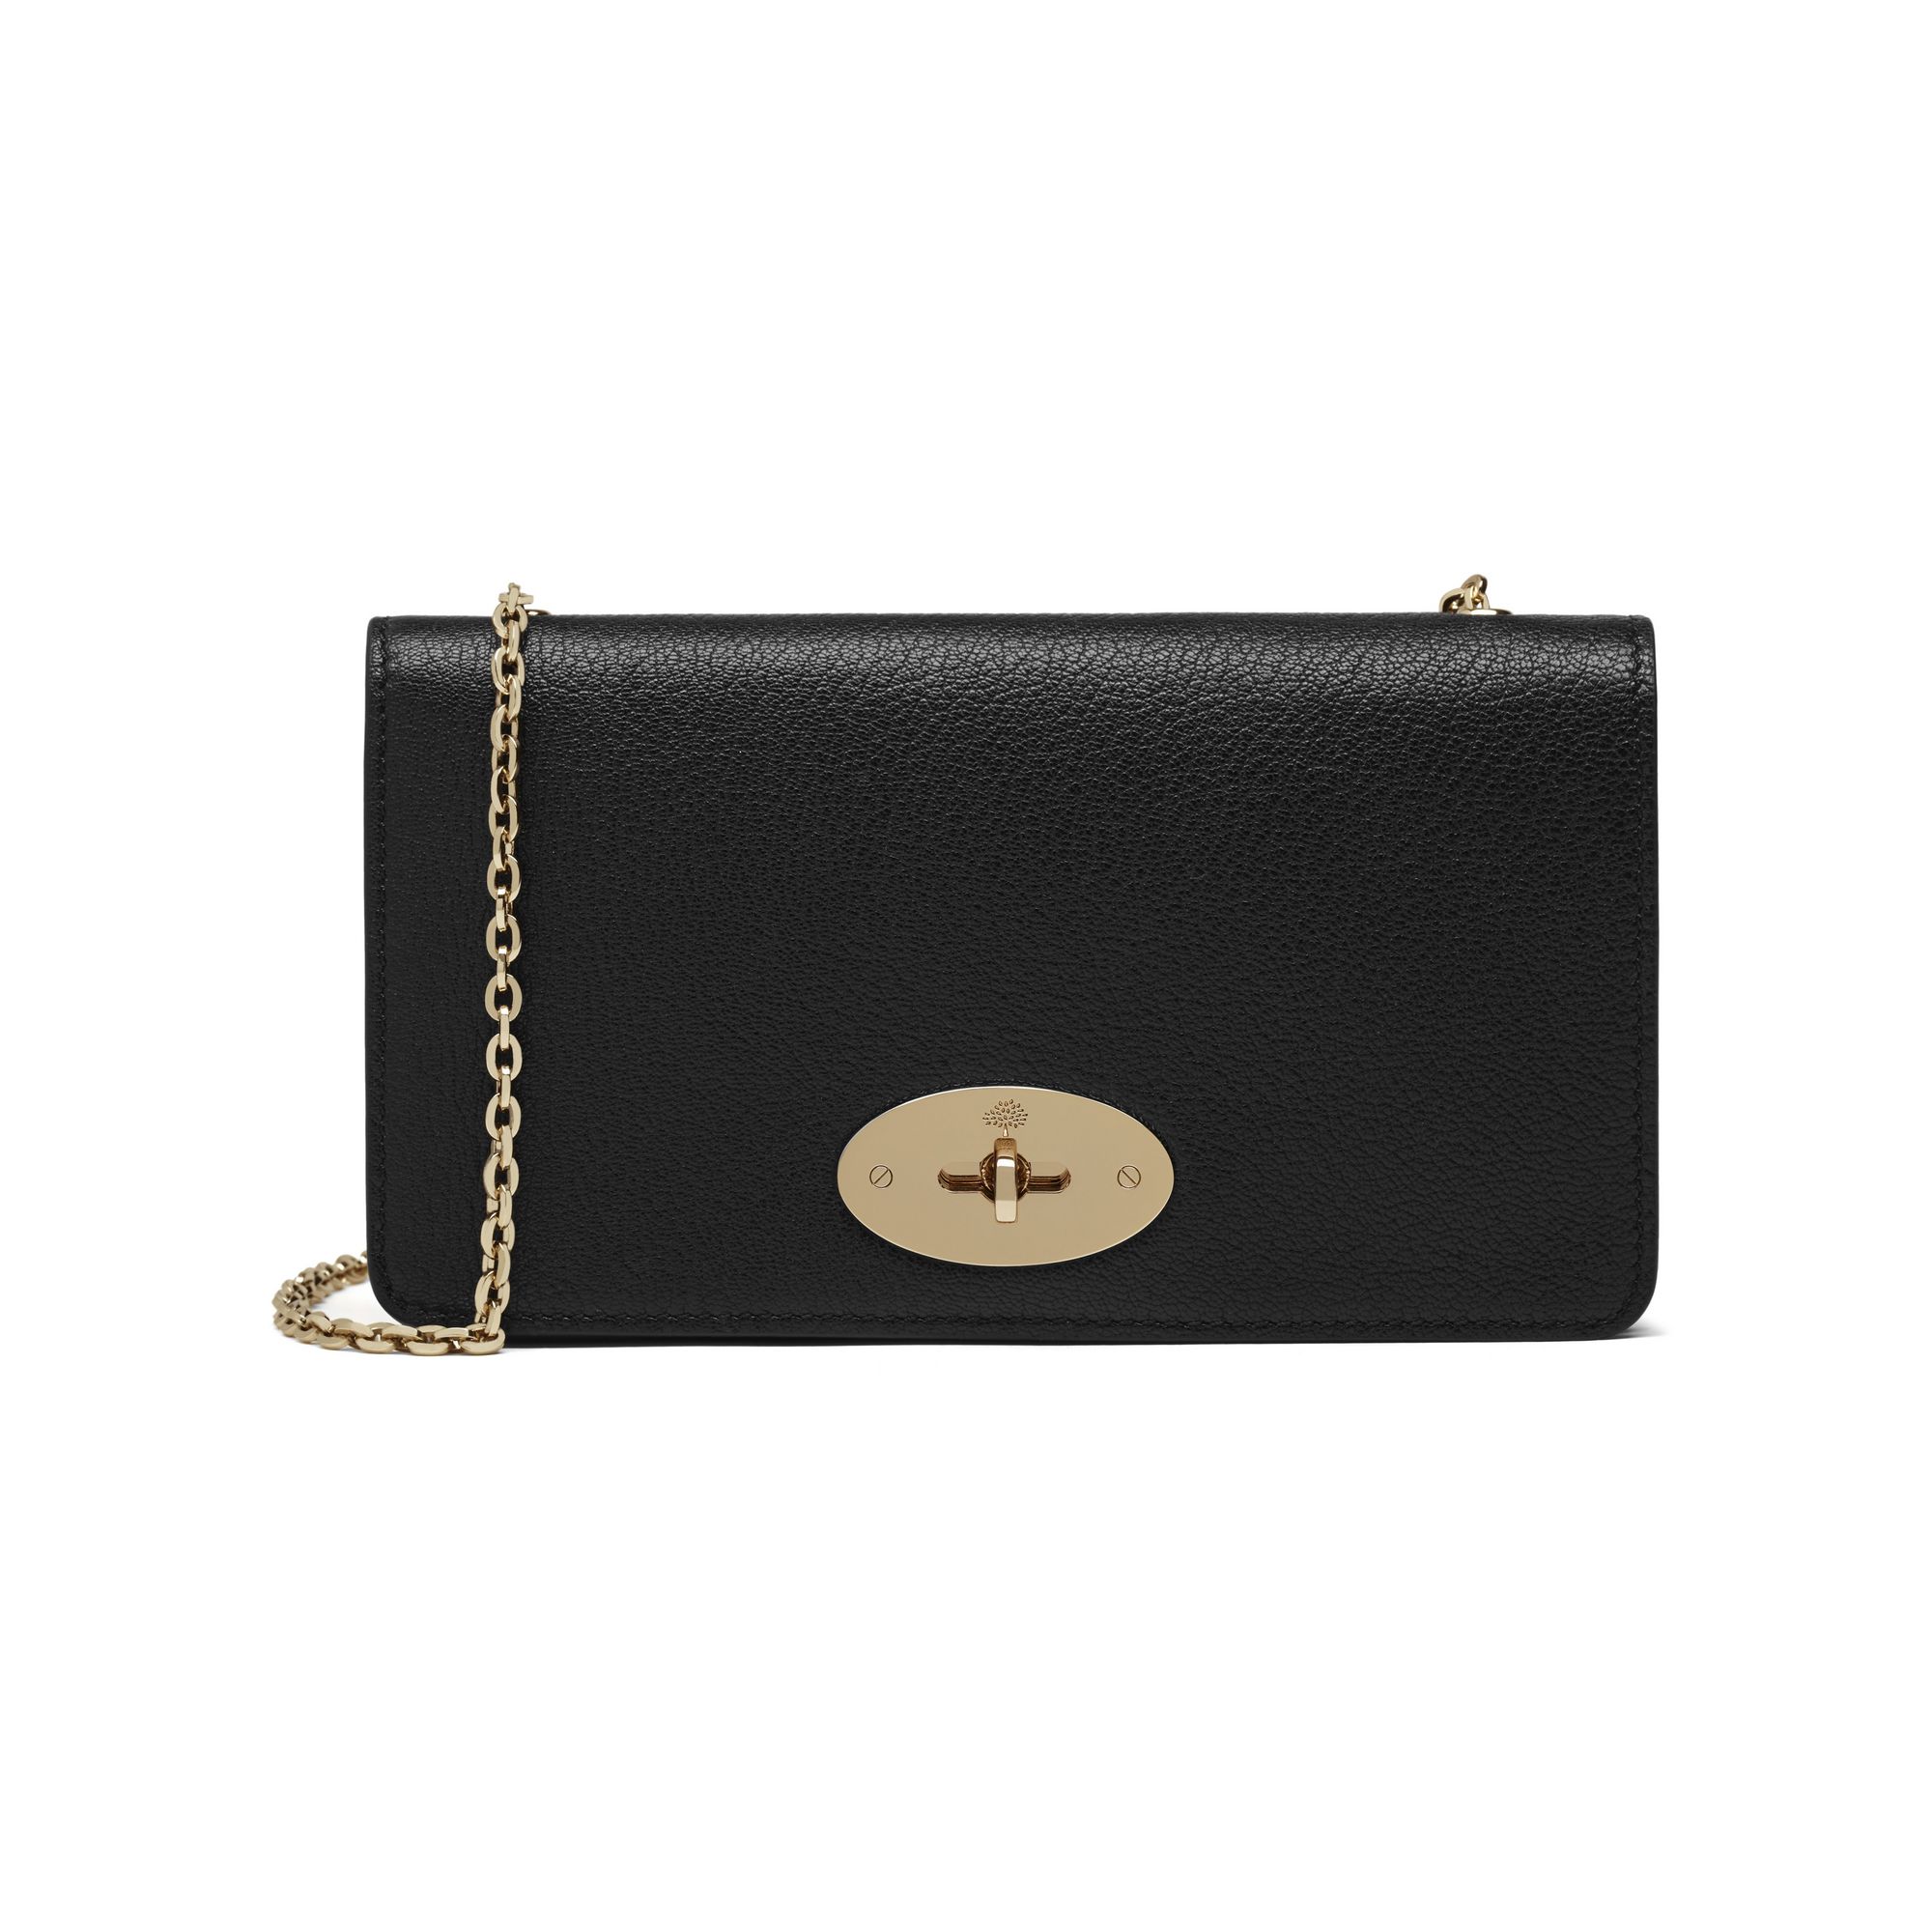 Mulberry Bayswater Clutch Bag in Black